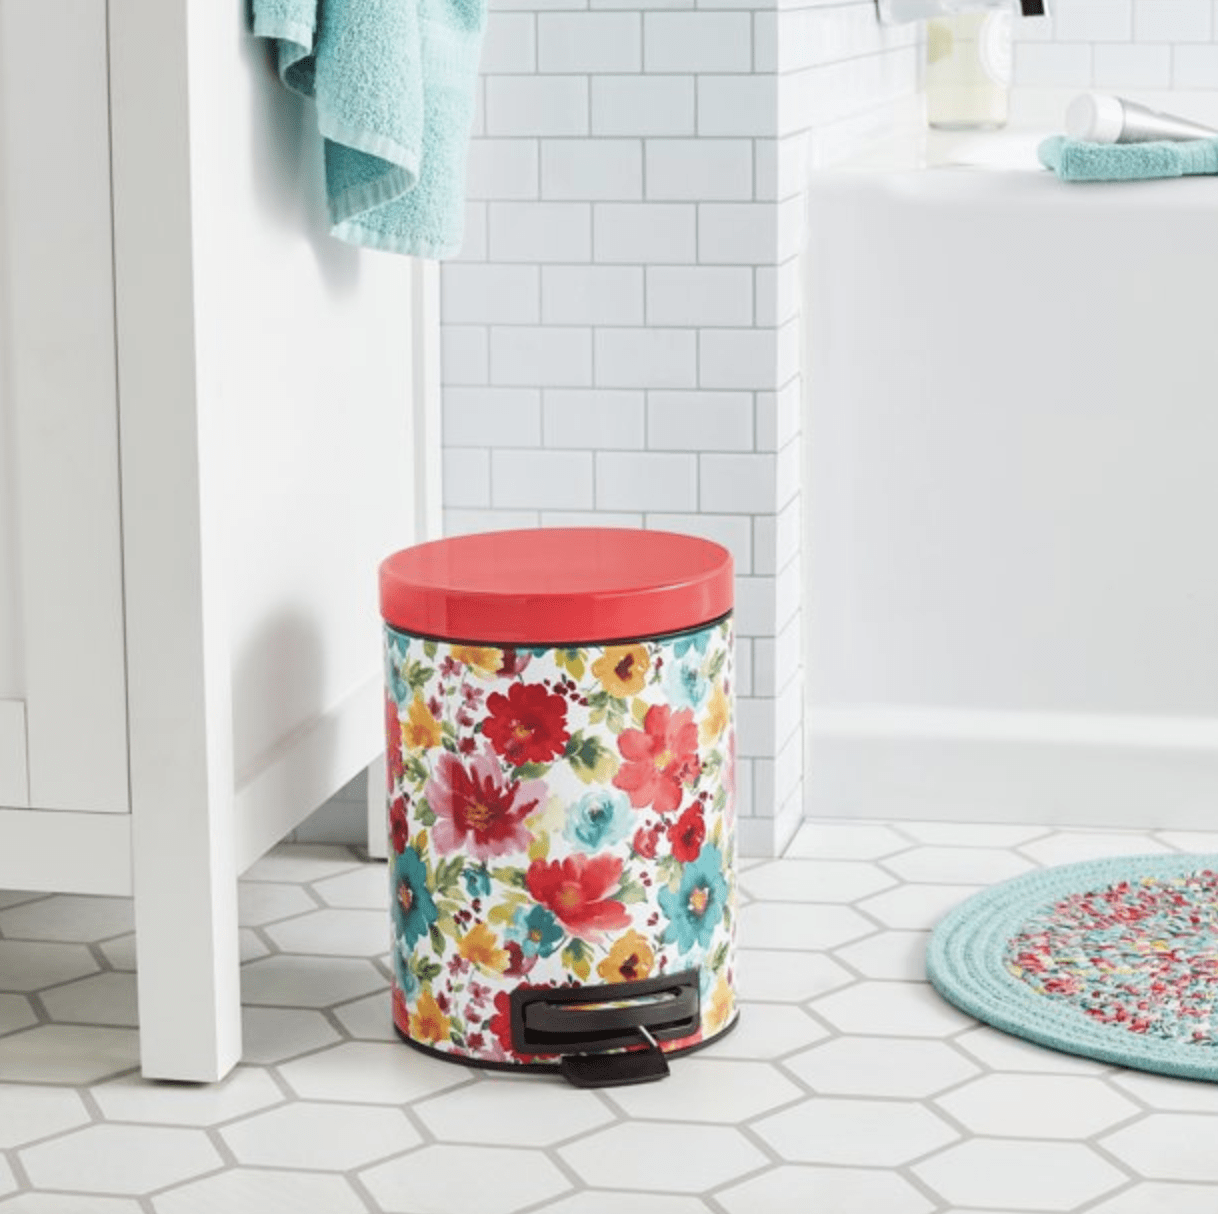 The Pioneer Woman new bath and bedding collections launch at Walmart